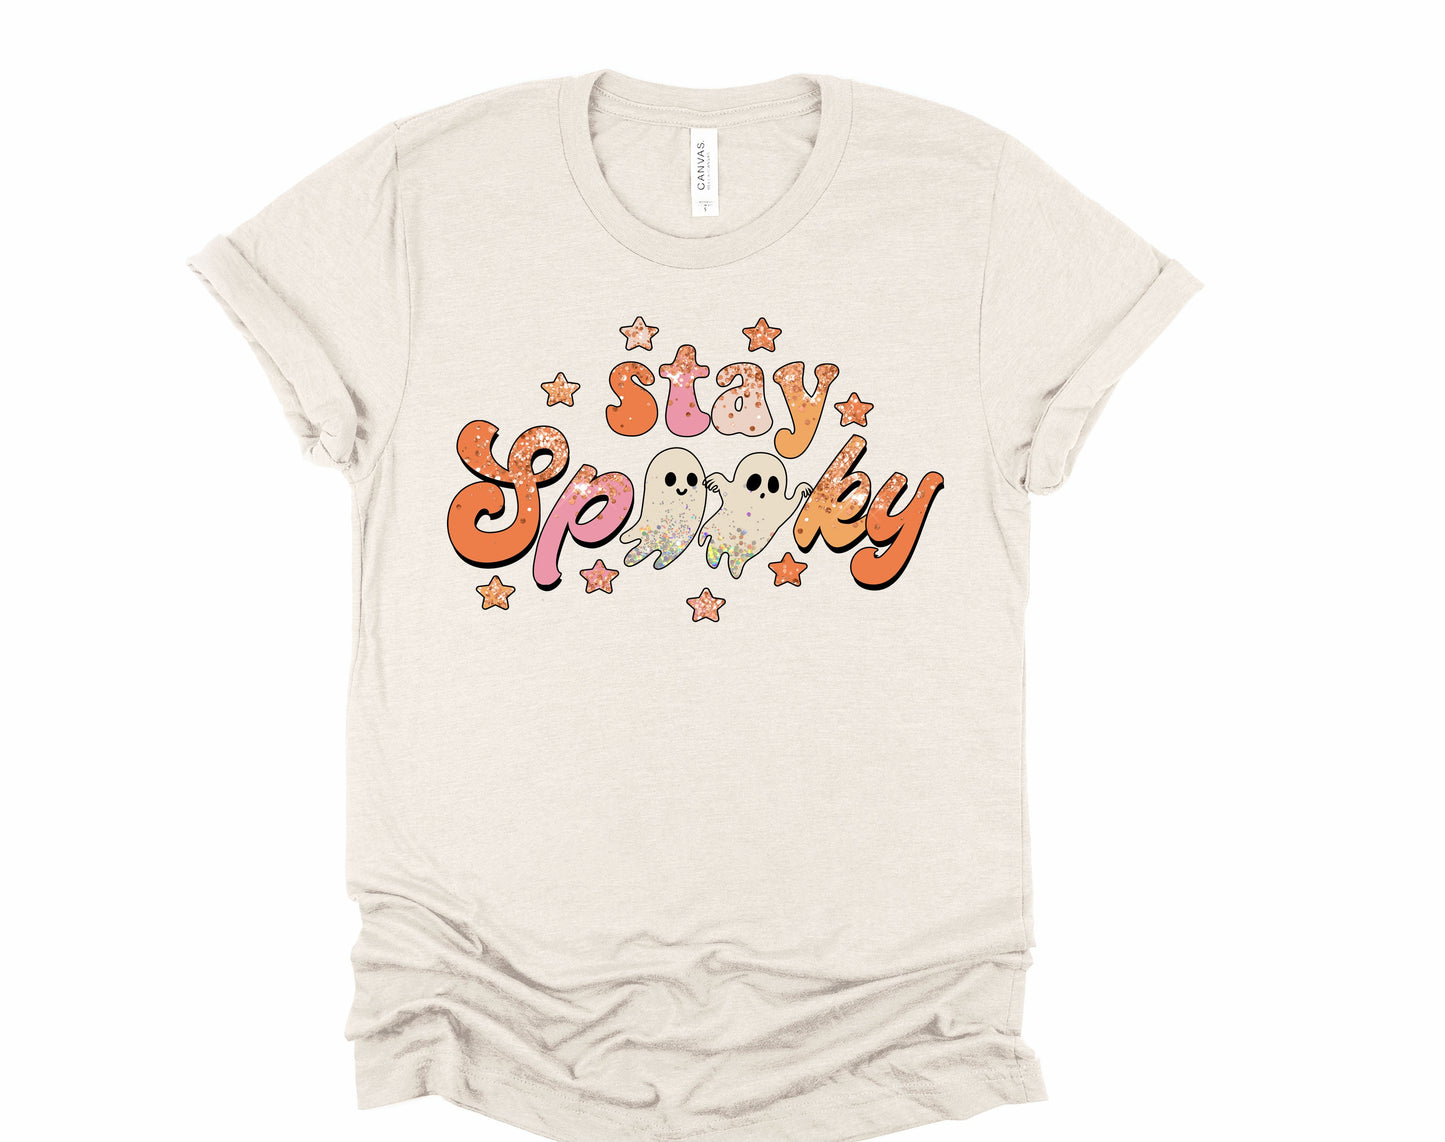 Stay Spooky Sparkle Graphic Tee